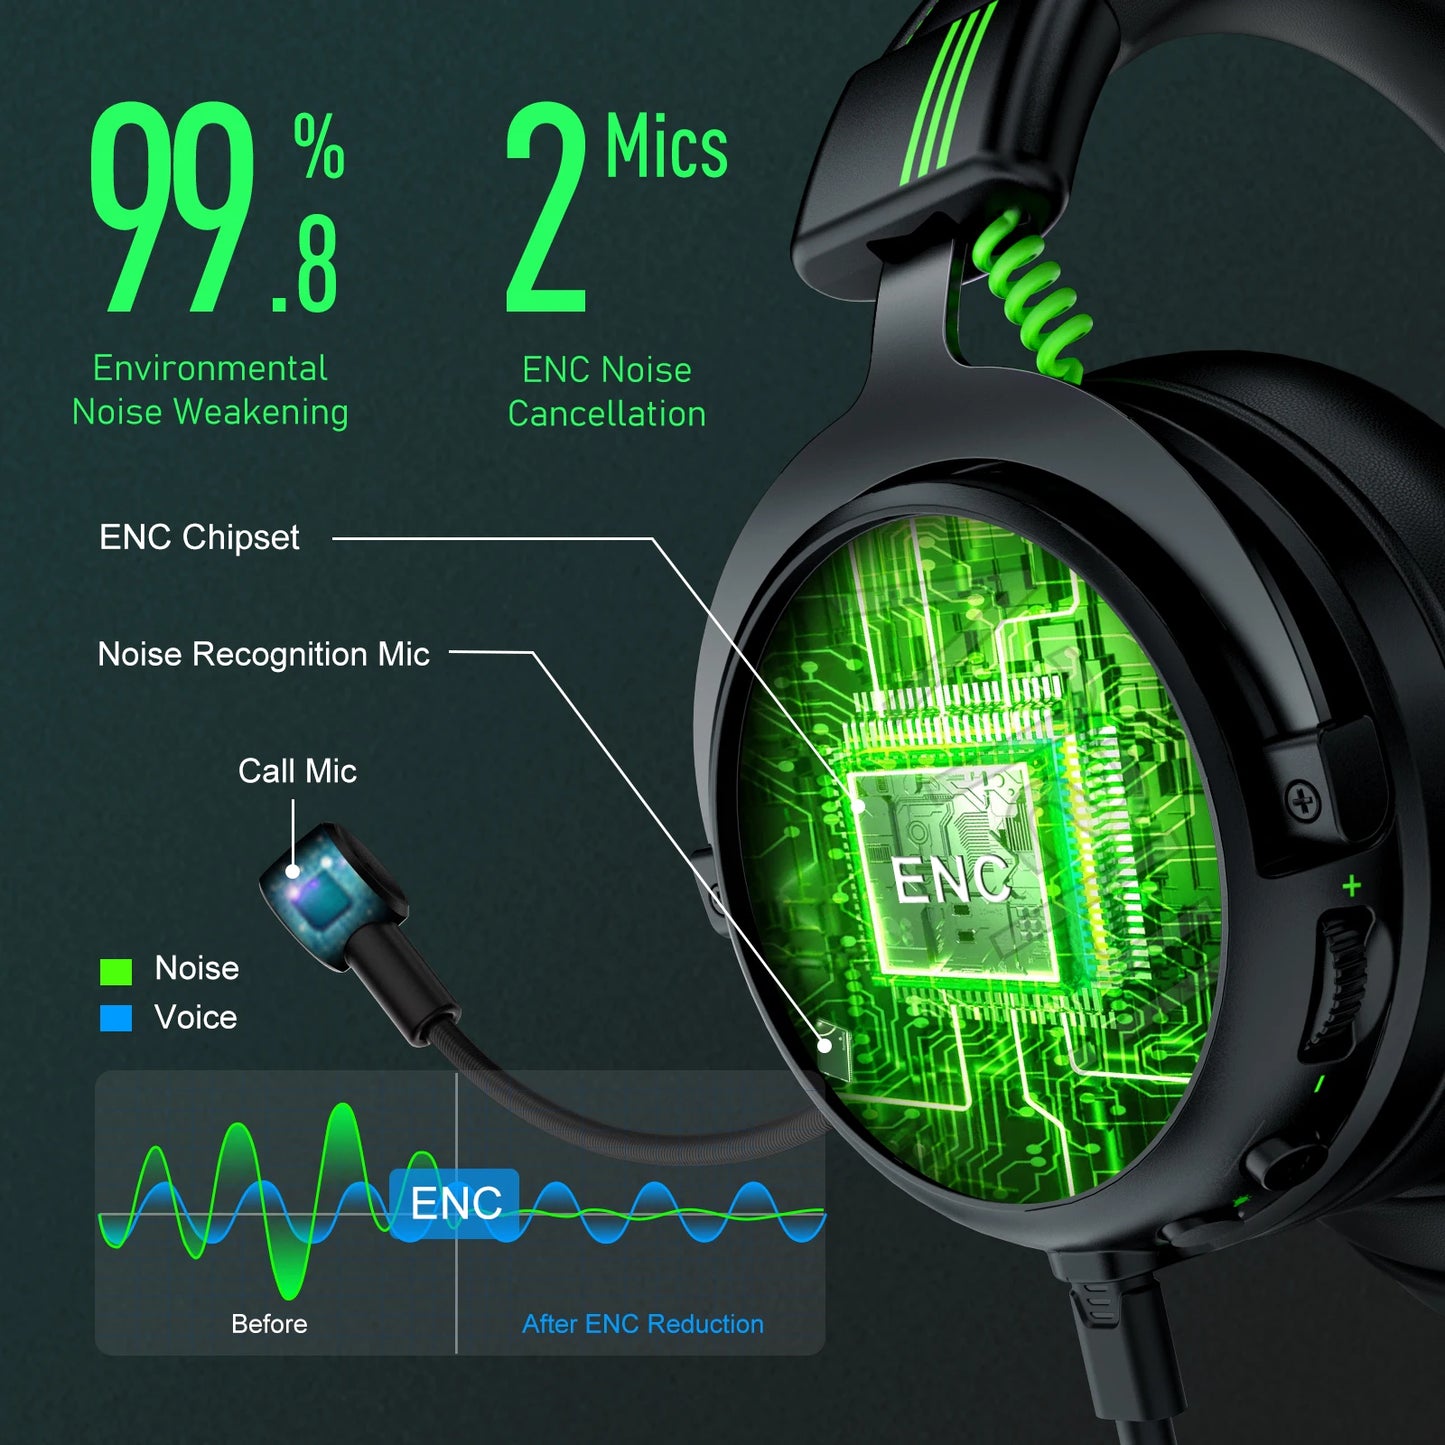 EKSA Wired Headset Gamer 7.1 Surround/Stereo Gaming Headphones for PC/Xbox/PS4/PS5 with ENC Call Mic USB/Type C/3.5mm Earphones